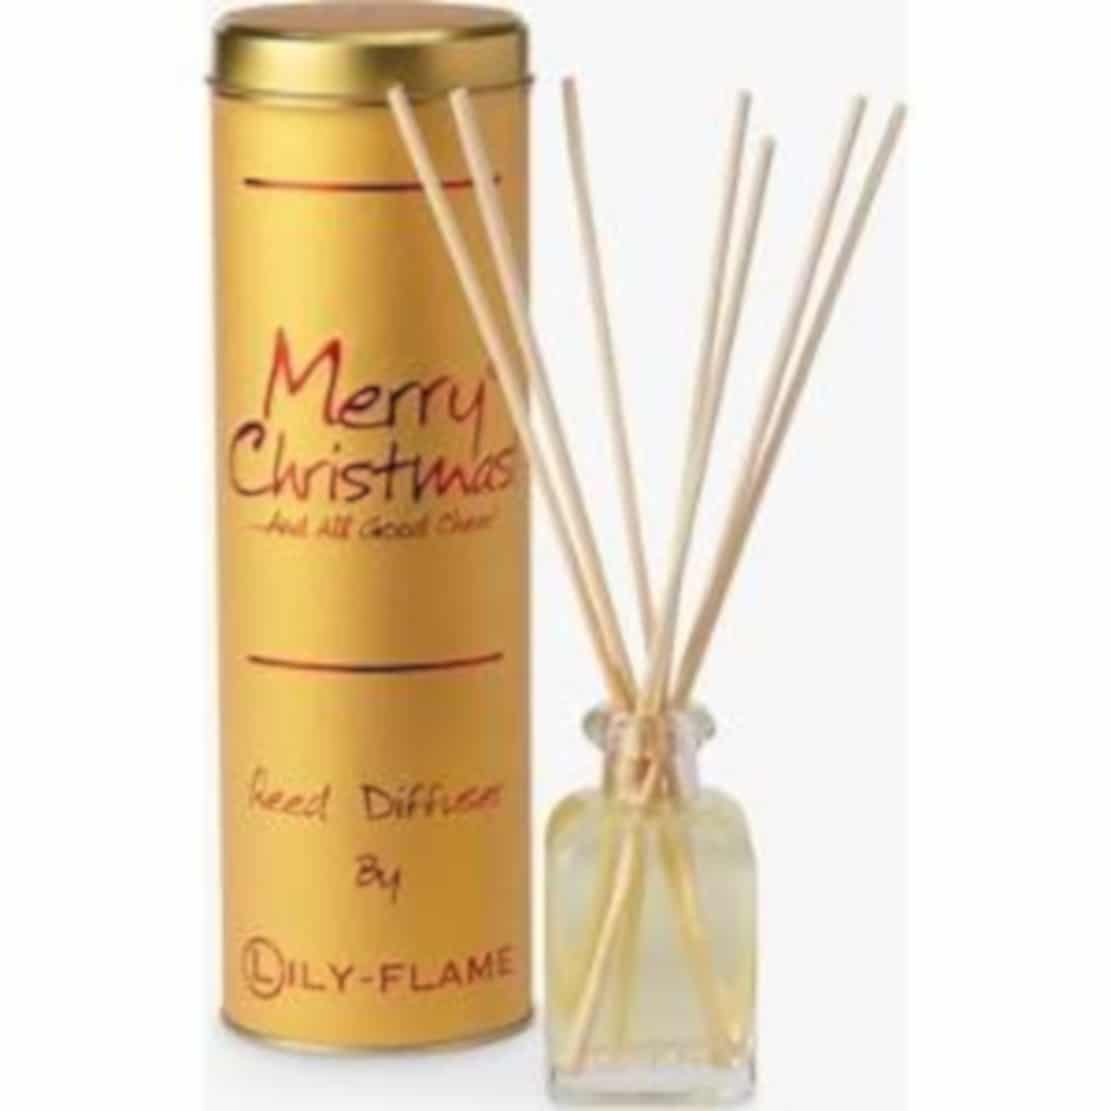 Lily Flame Merry Christmas Reed Diffuser